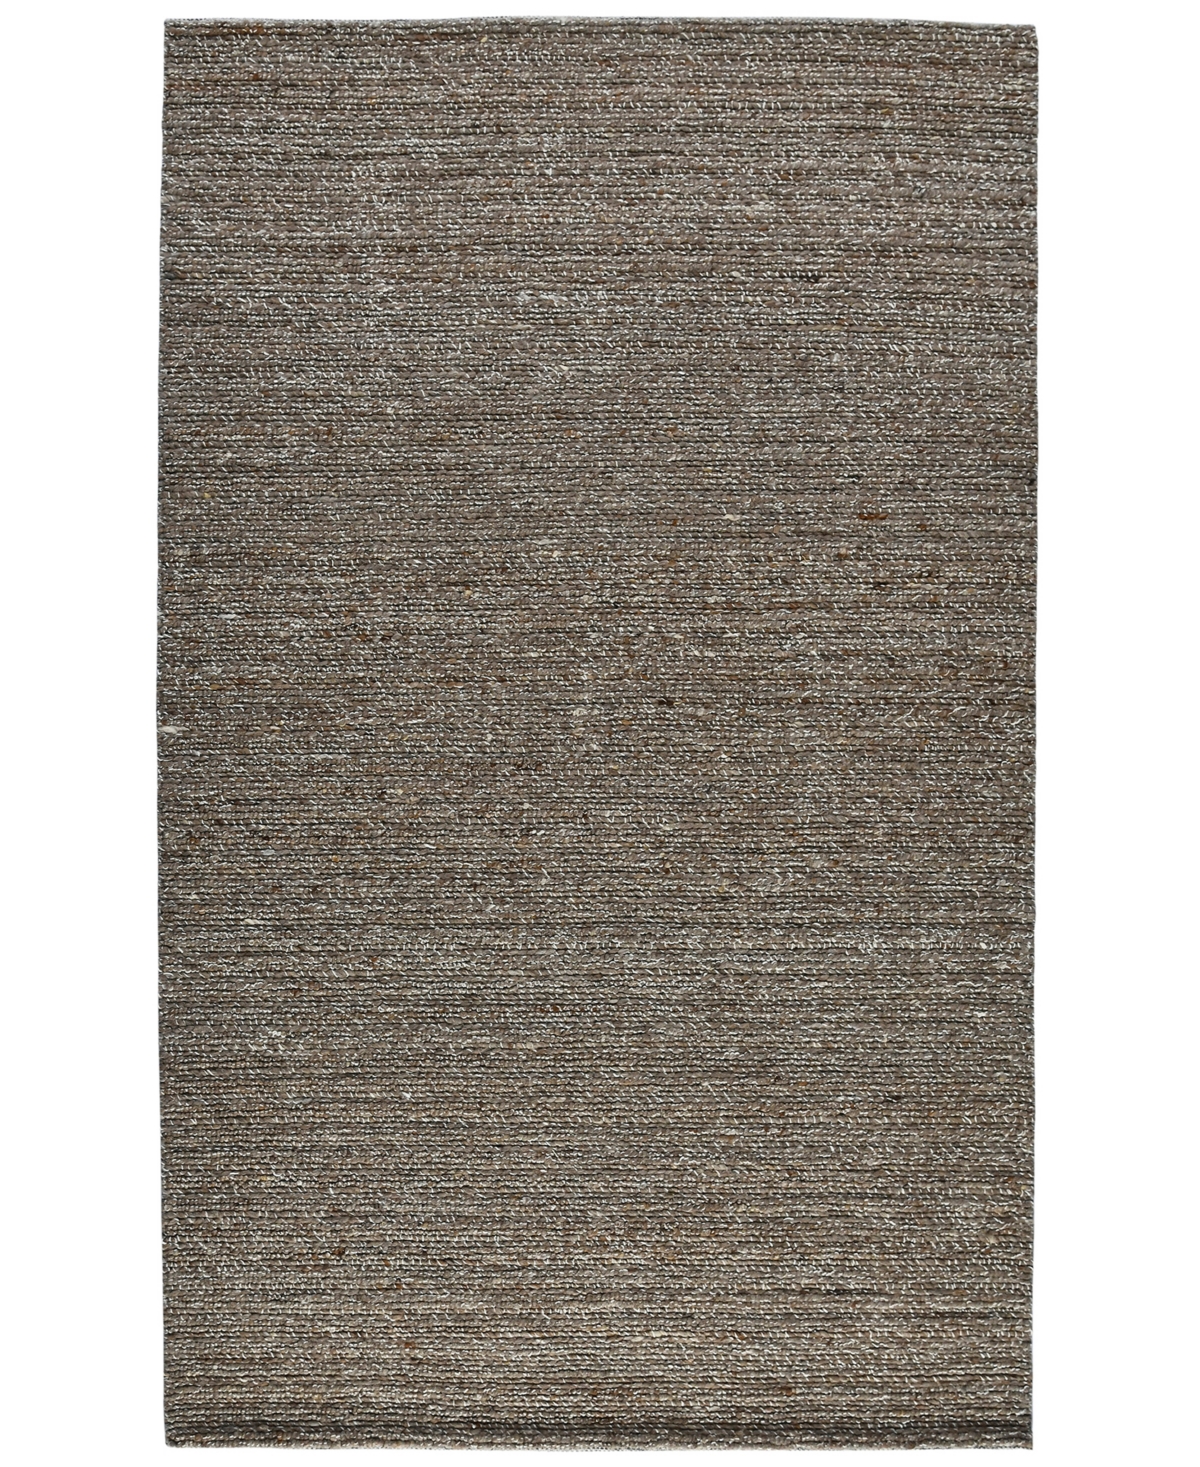 Amer Rugs Norwood Nor4 3'6" X 5'6" Area Rug In Camel